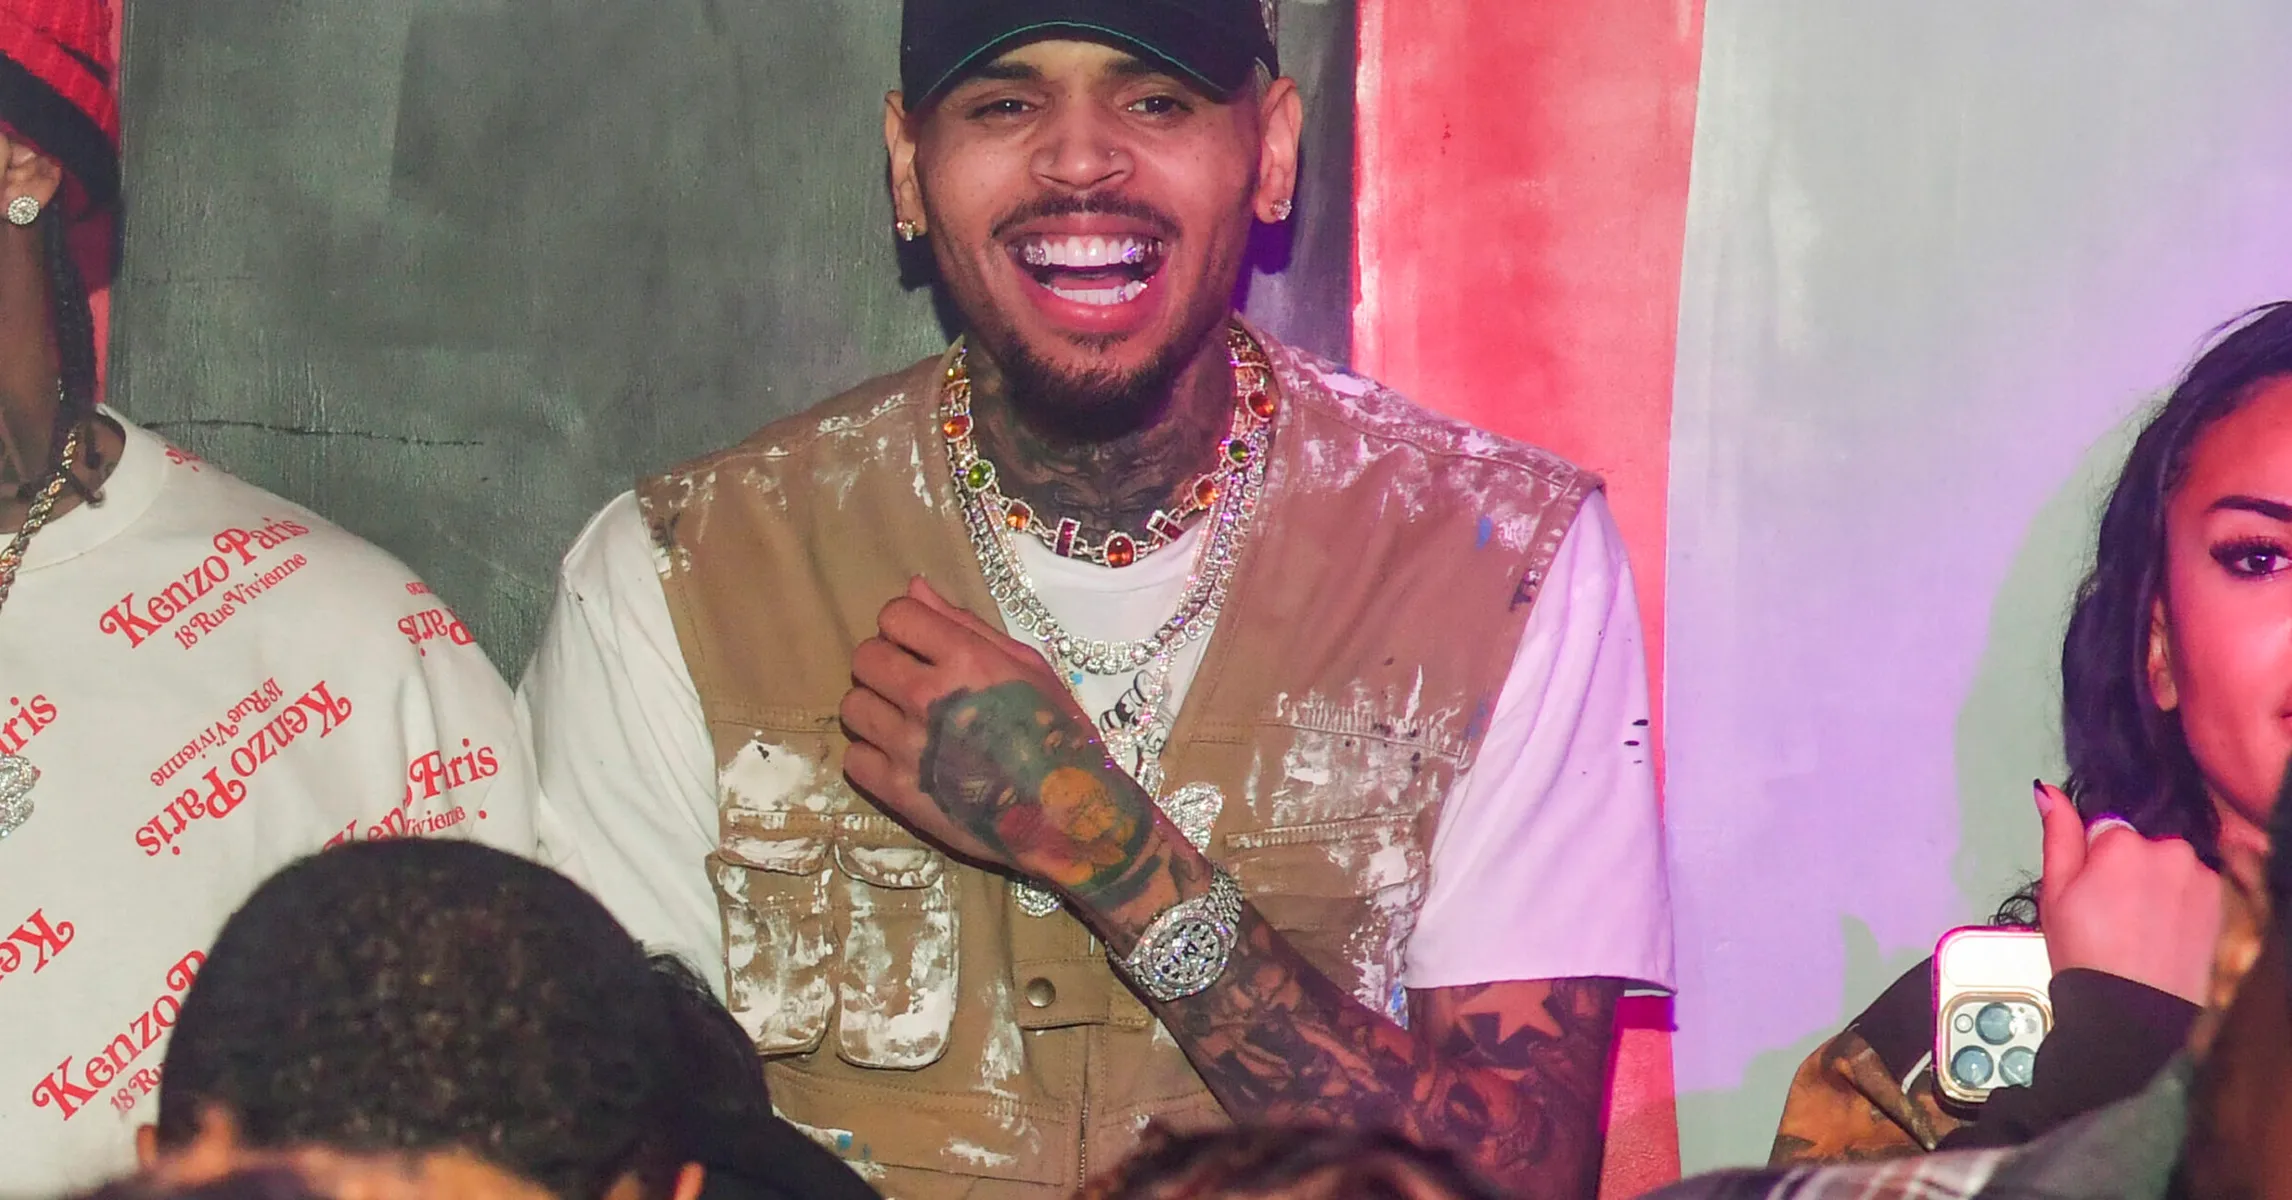 Chris Brown proposes to a fan at a meet & greet